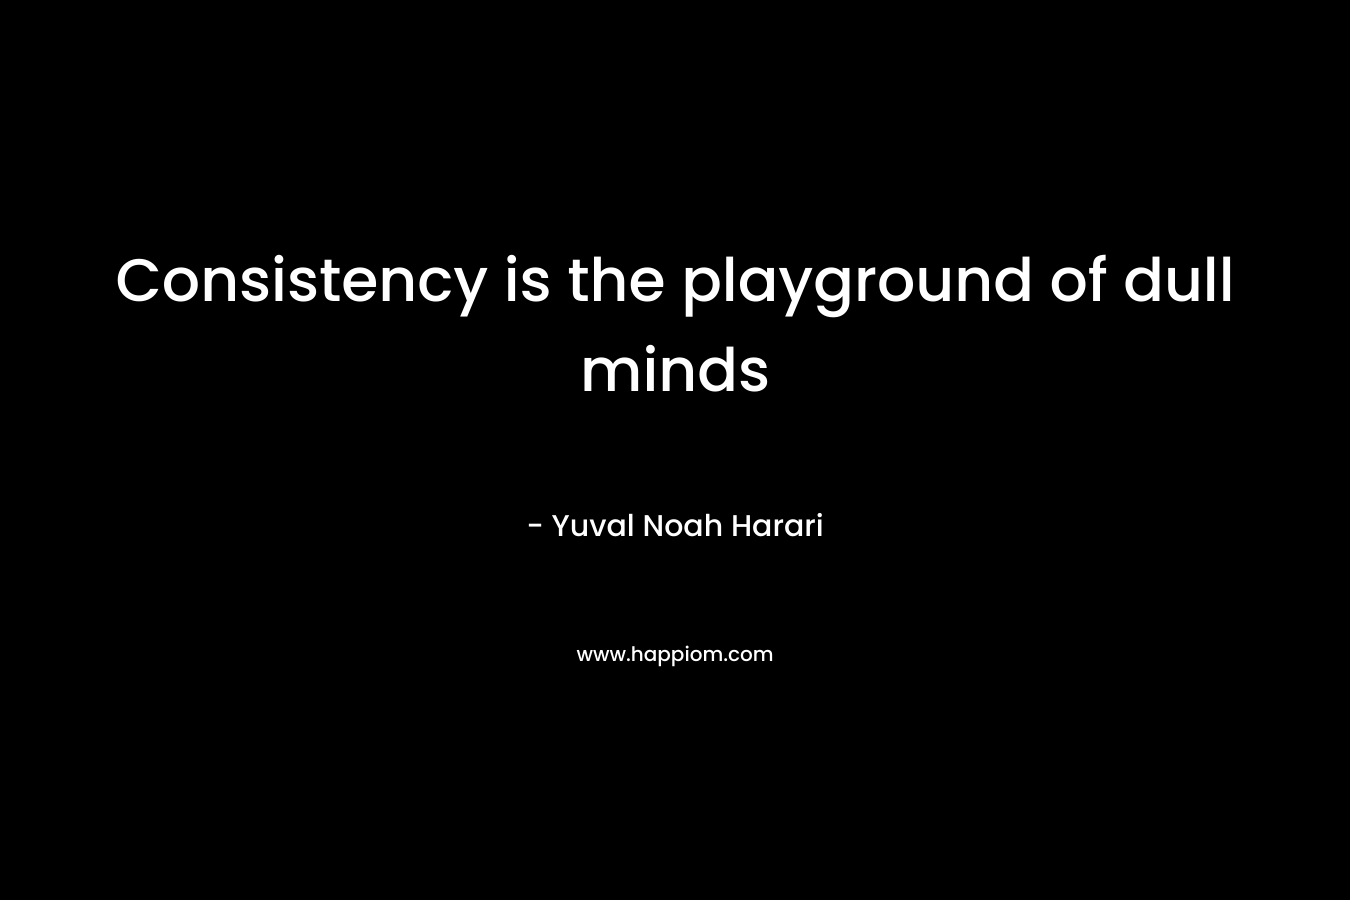 Consistency is the playground of dull minds